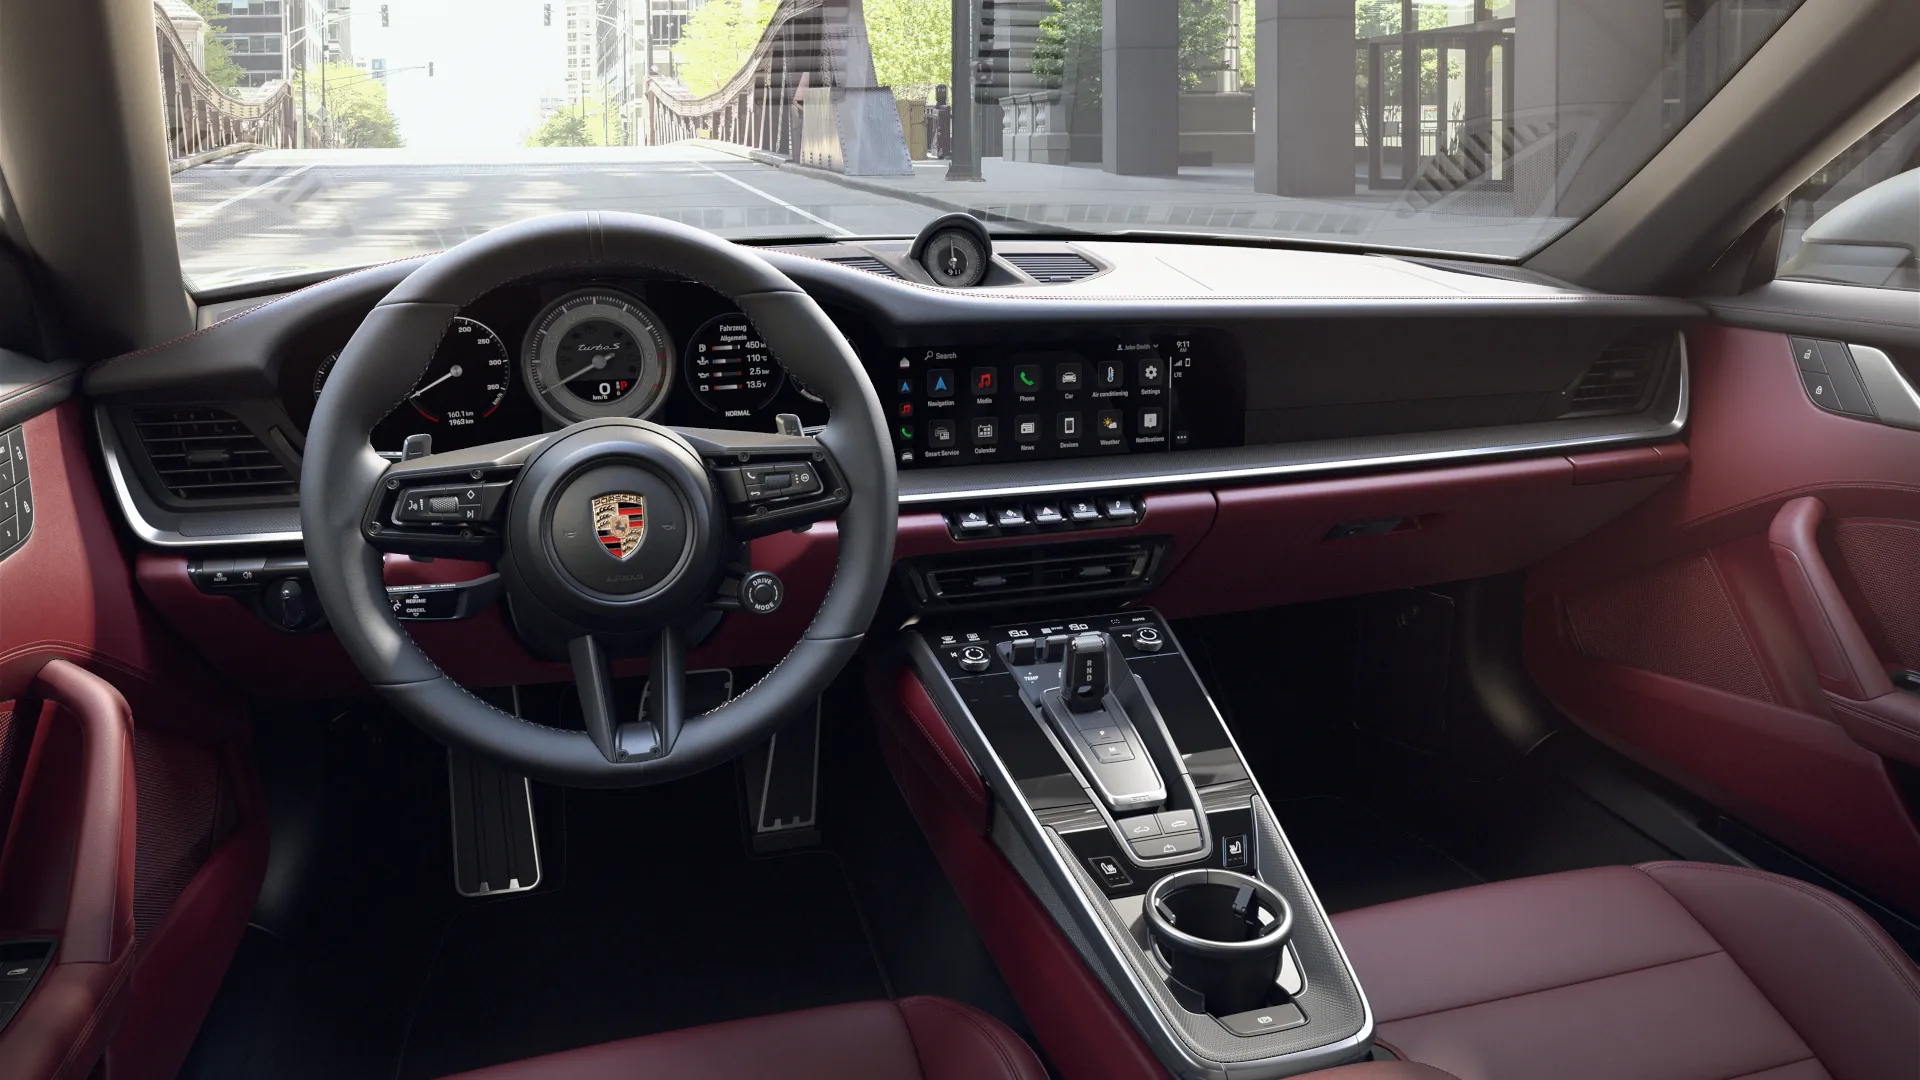 Interior view of 911 Turbo S Cabriolet